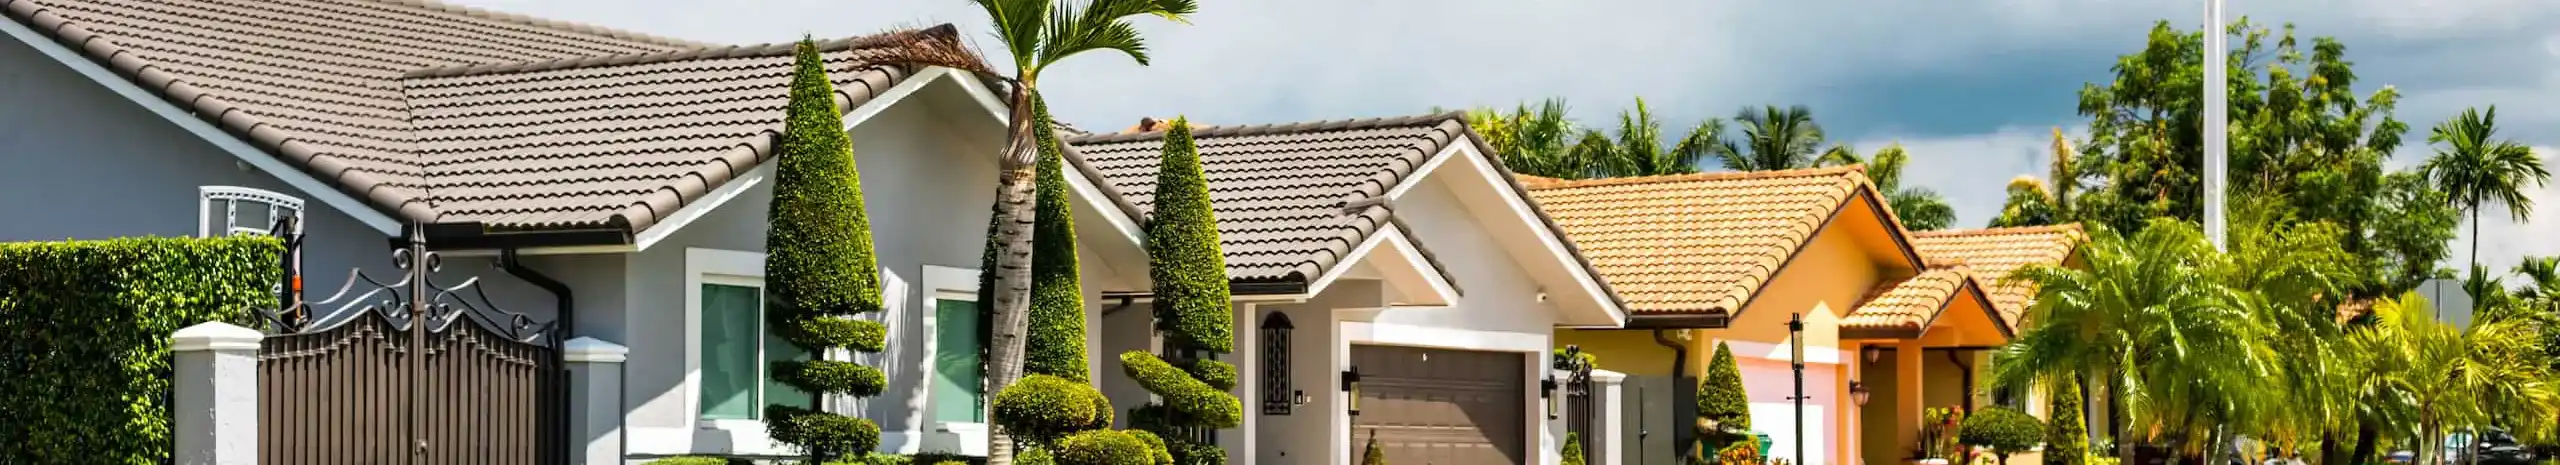 Suburban homes in a residential neighborhood - Keep pests away from your home with Florida Pest Control